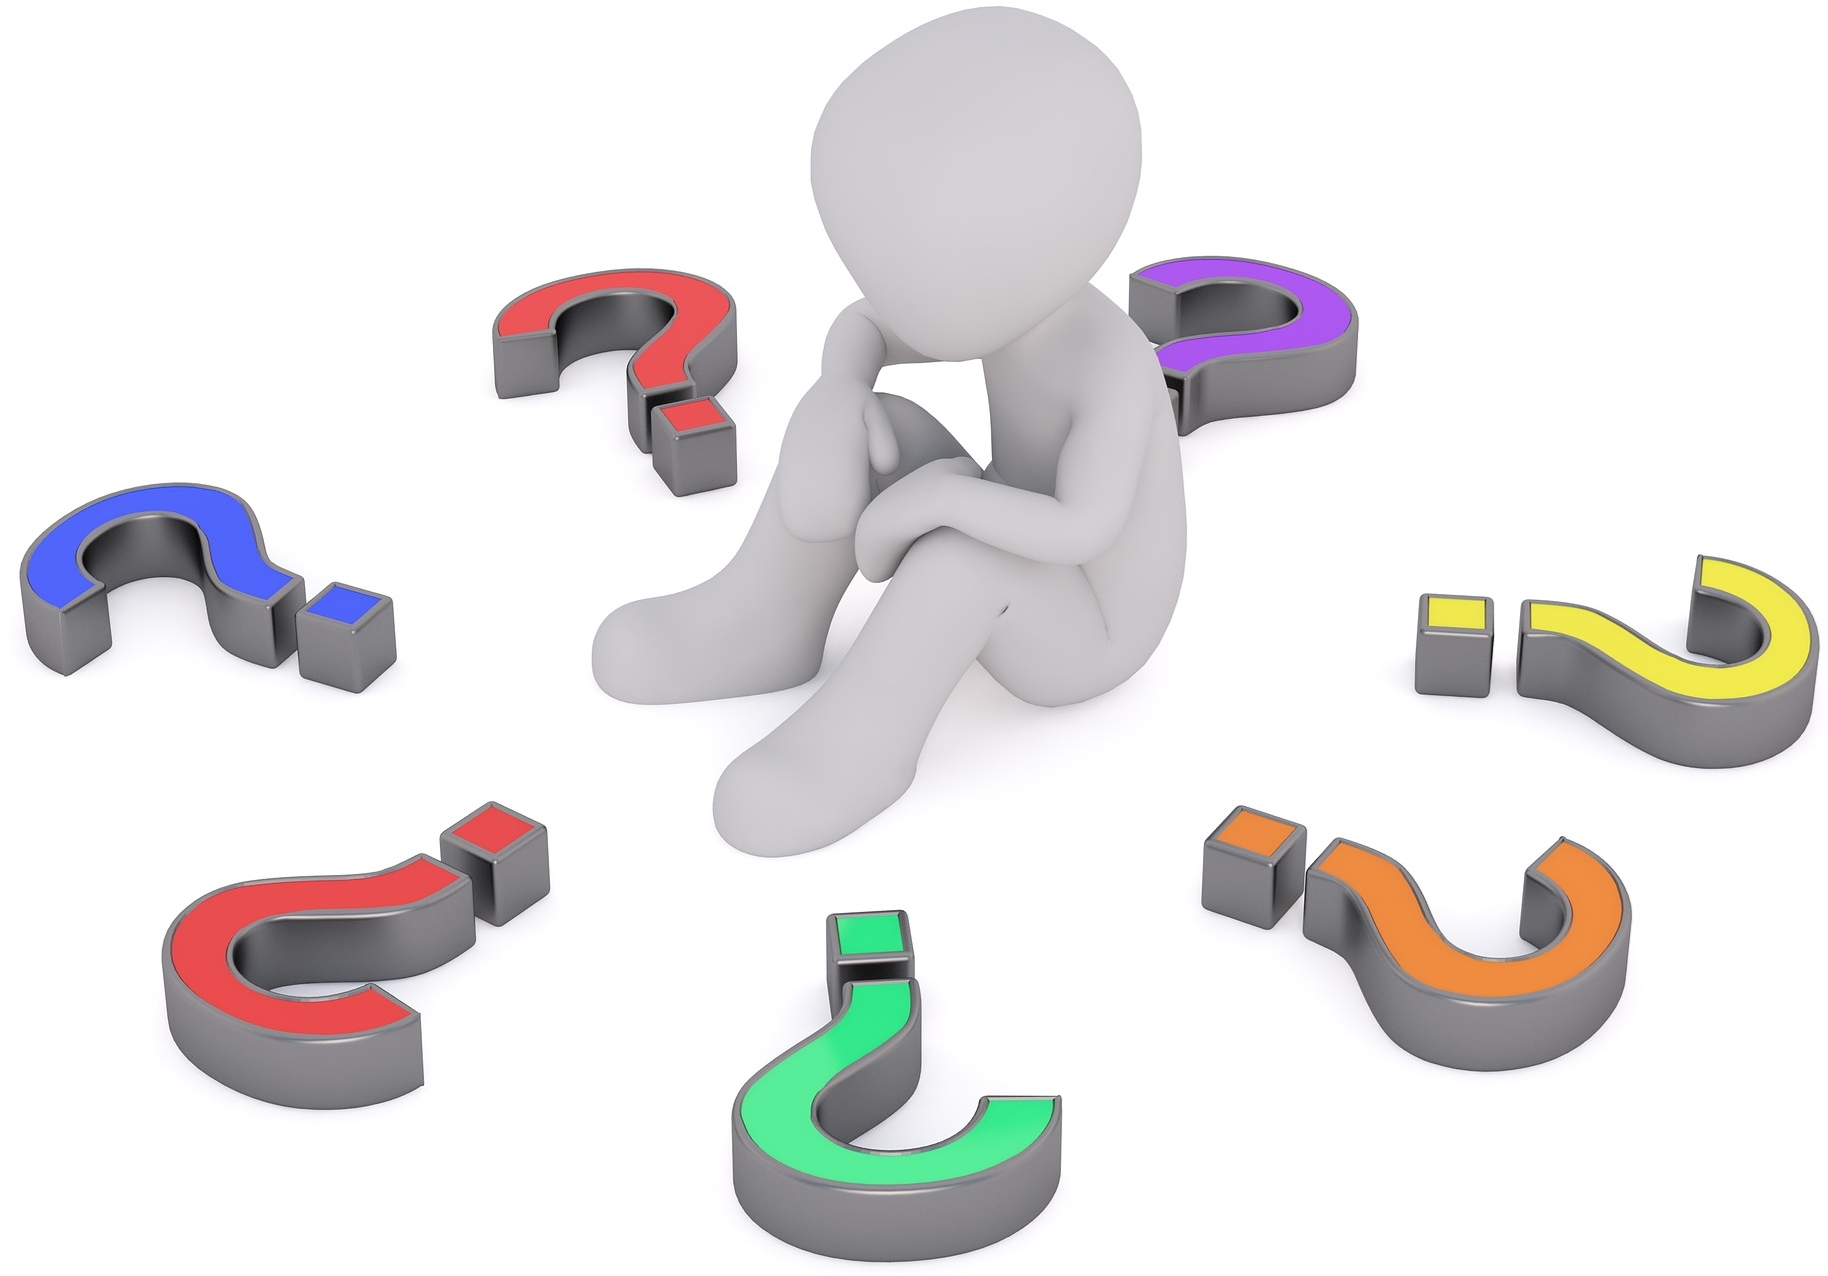 Clipart of a character surrounded by question marks